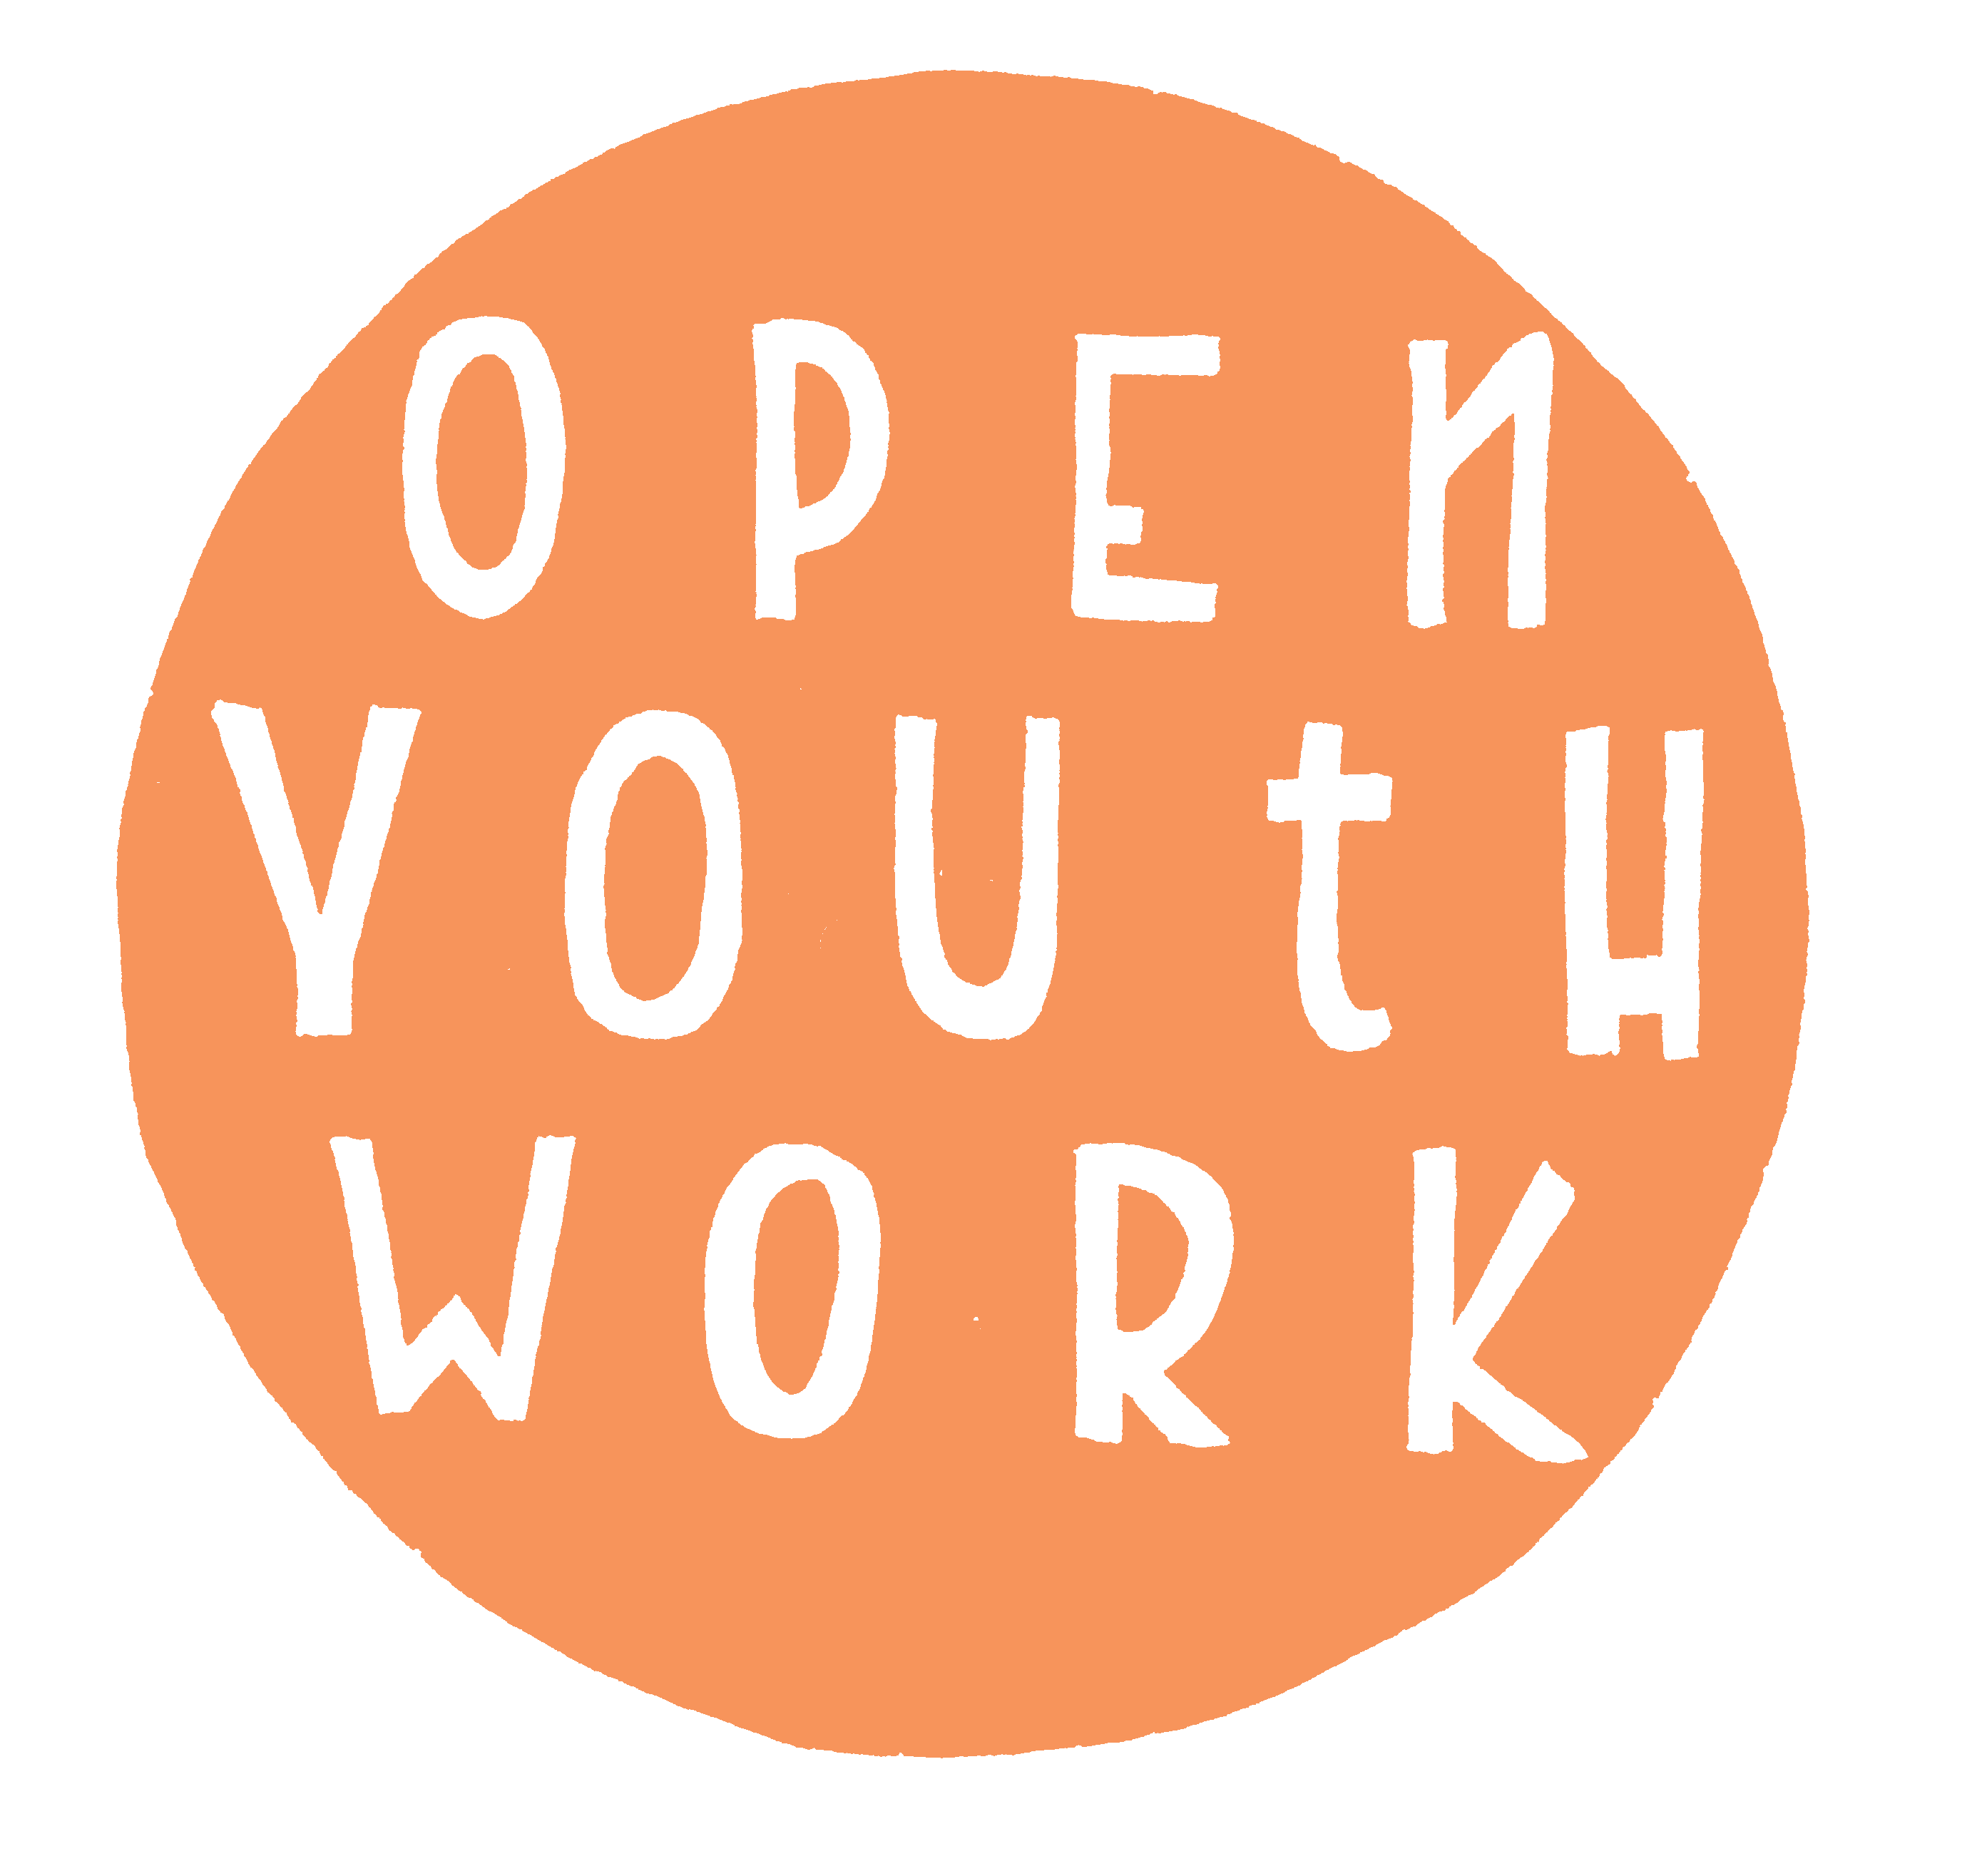 OPEN YOUTH WORK FOR AN OPEN SOCIETY